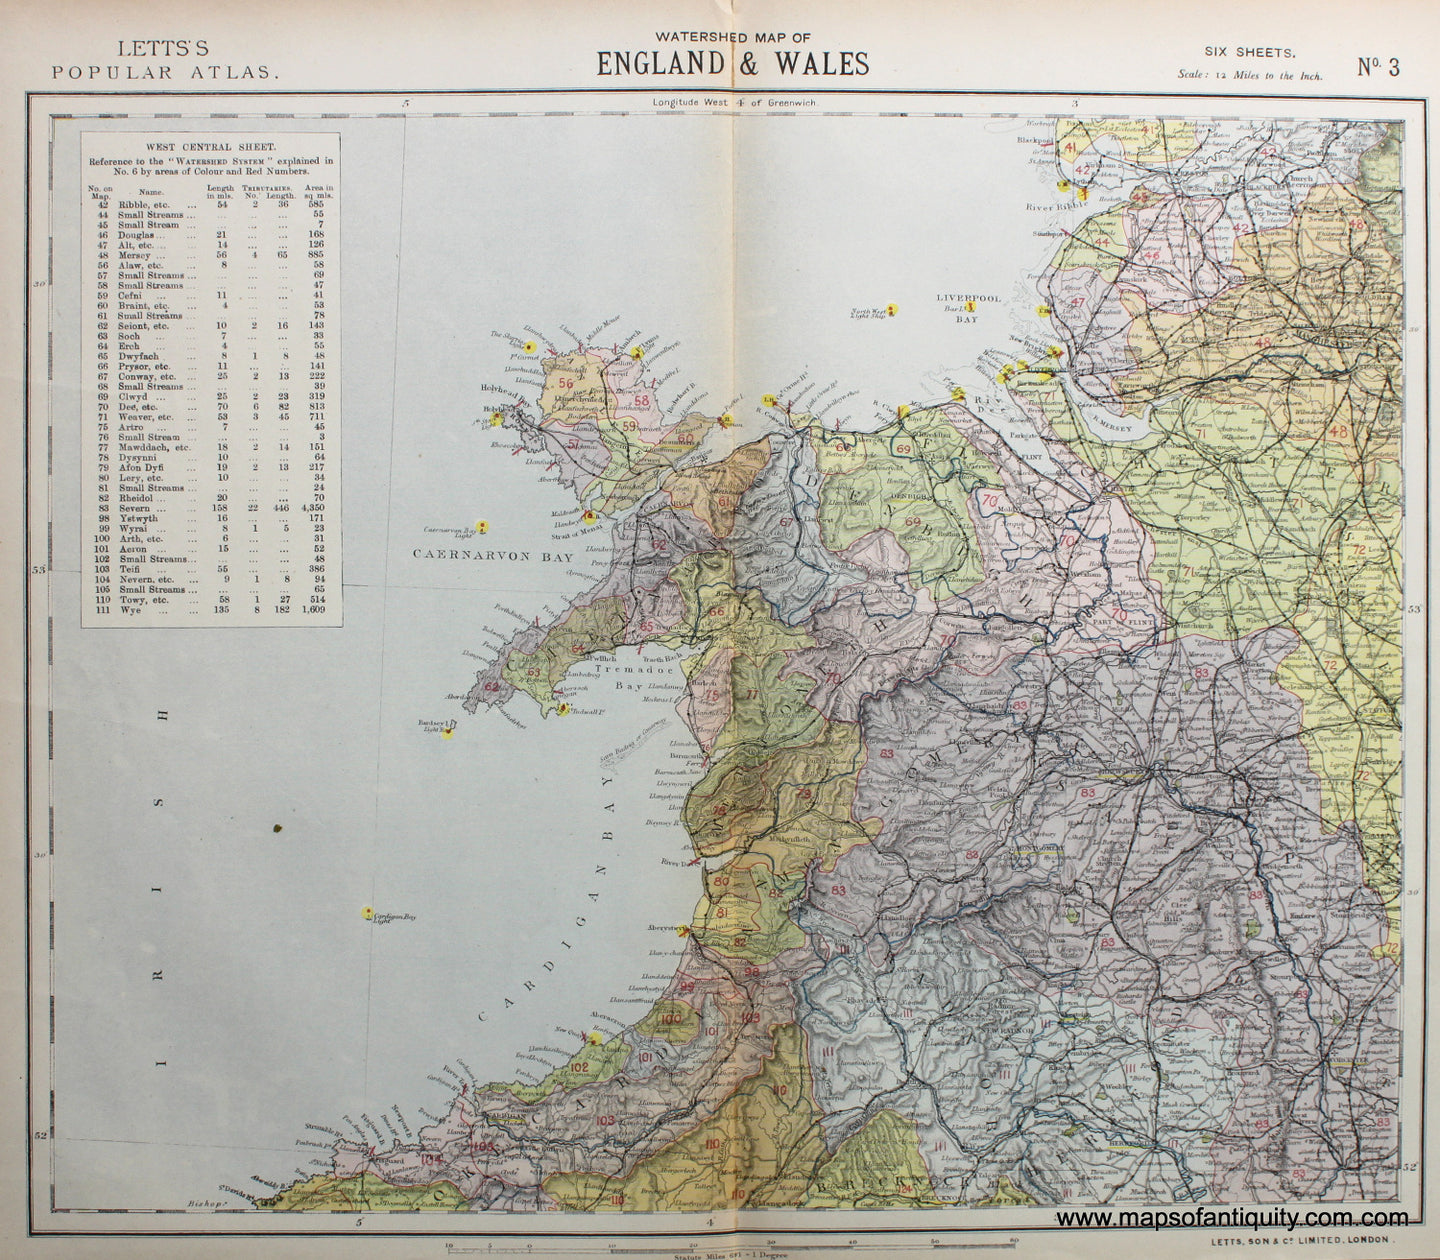 printed-color-Antique-Map-Watershed-Map-of-England-and-Wales-Sheet-Three-of-Six-Europe-England-1883-Letts-Maps-Of-Antiquity